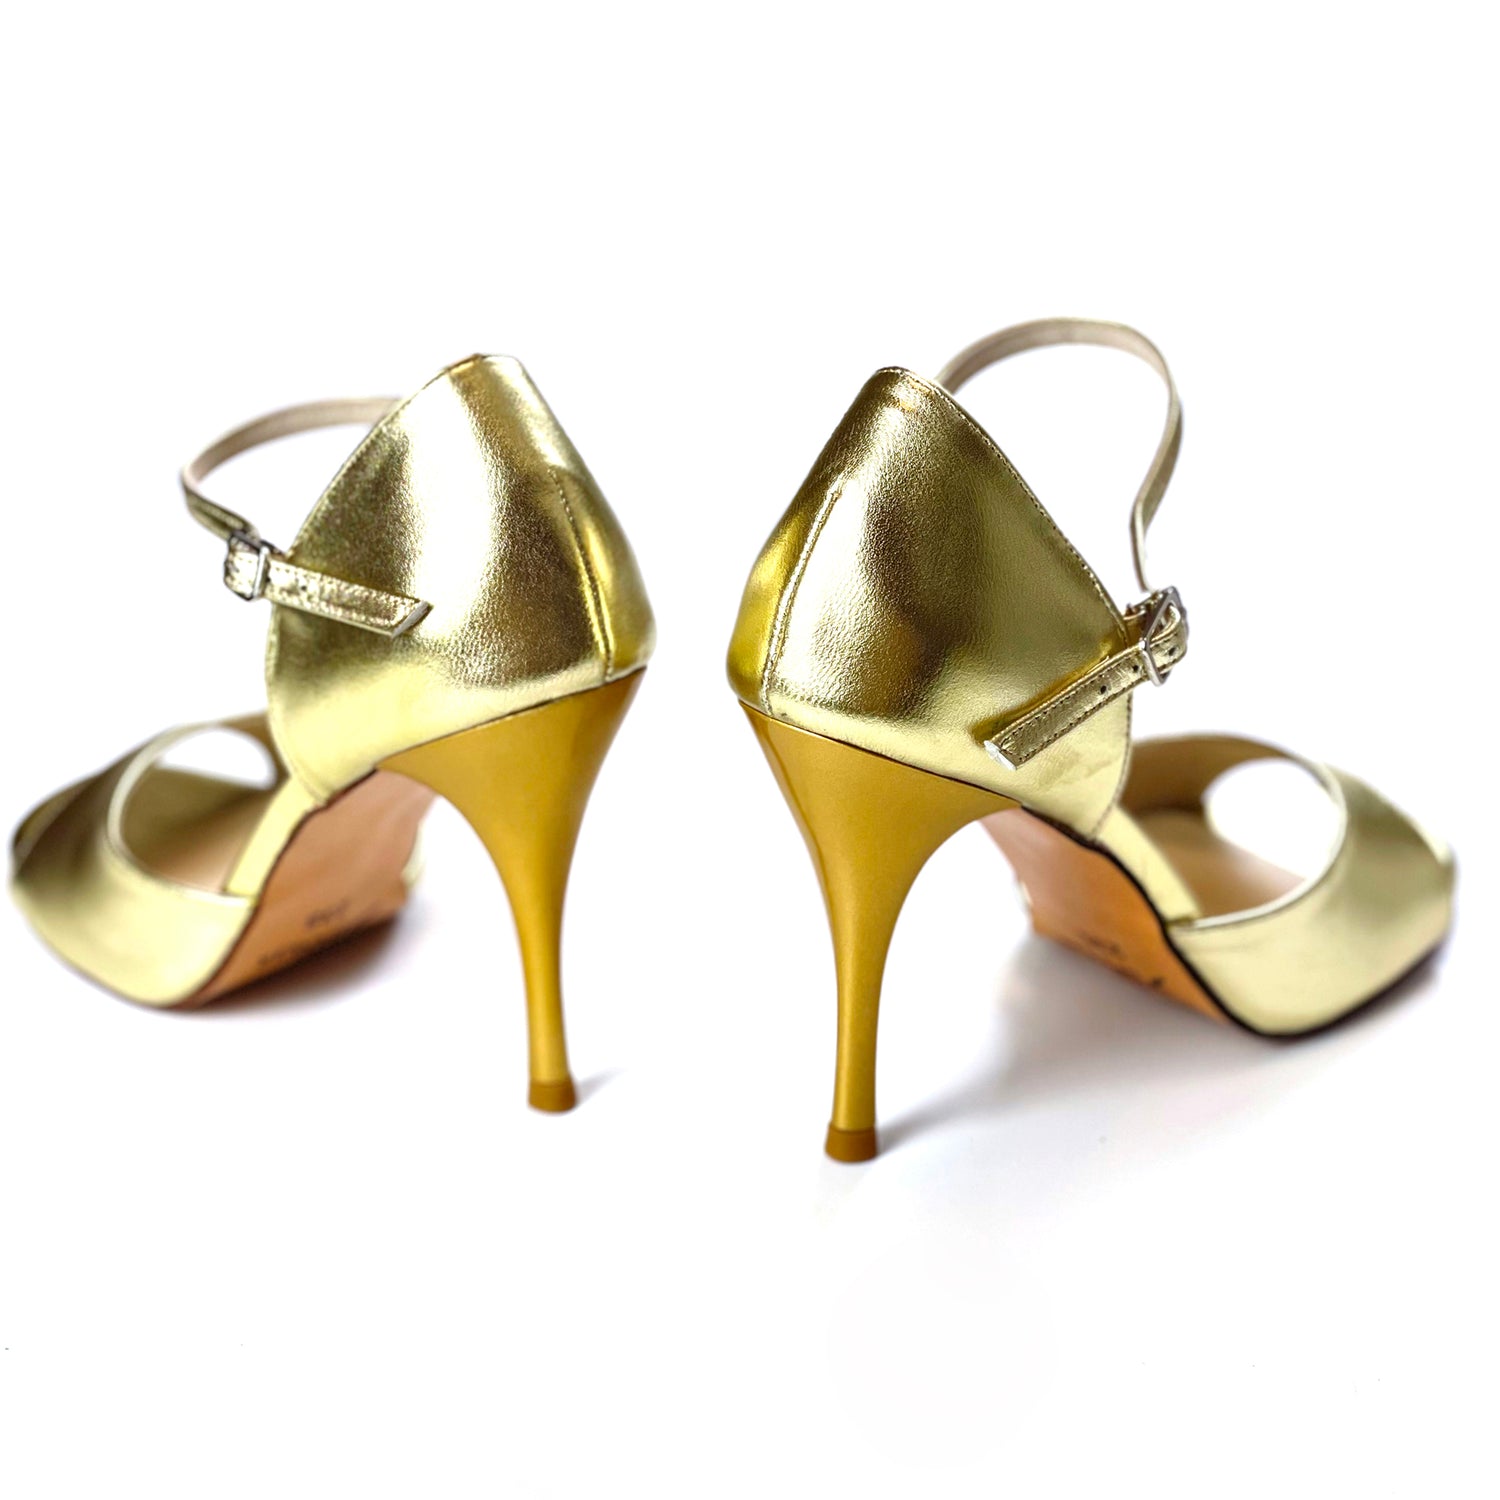 Pro Dancer gold Argentine tango shoes for women with high heels and leather dance sandals6